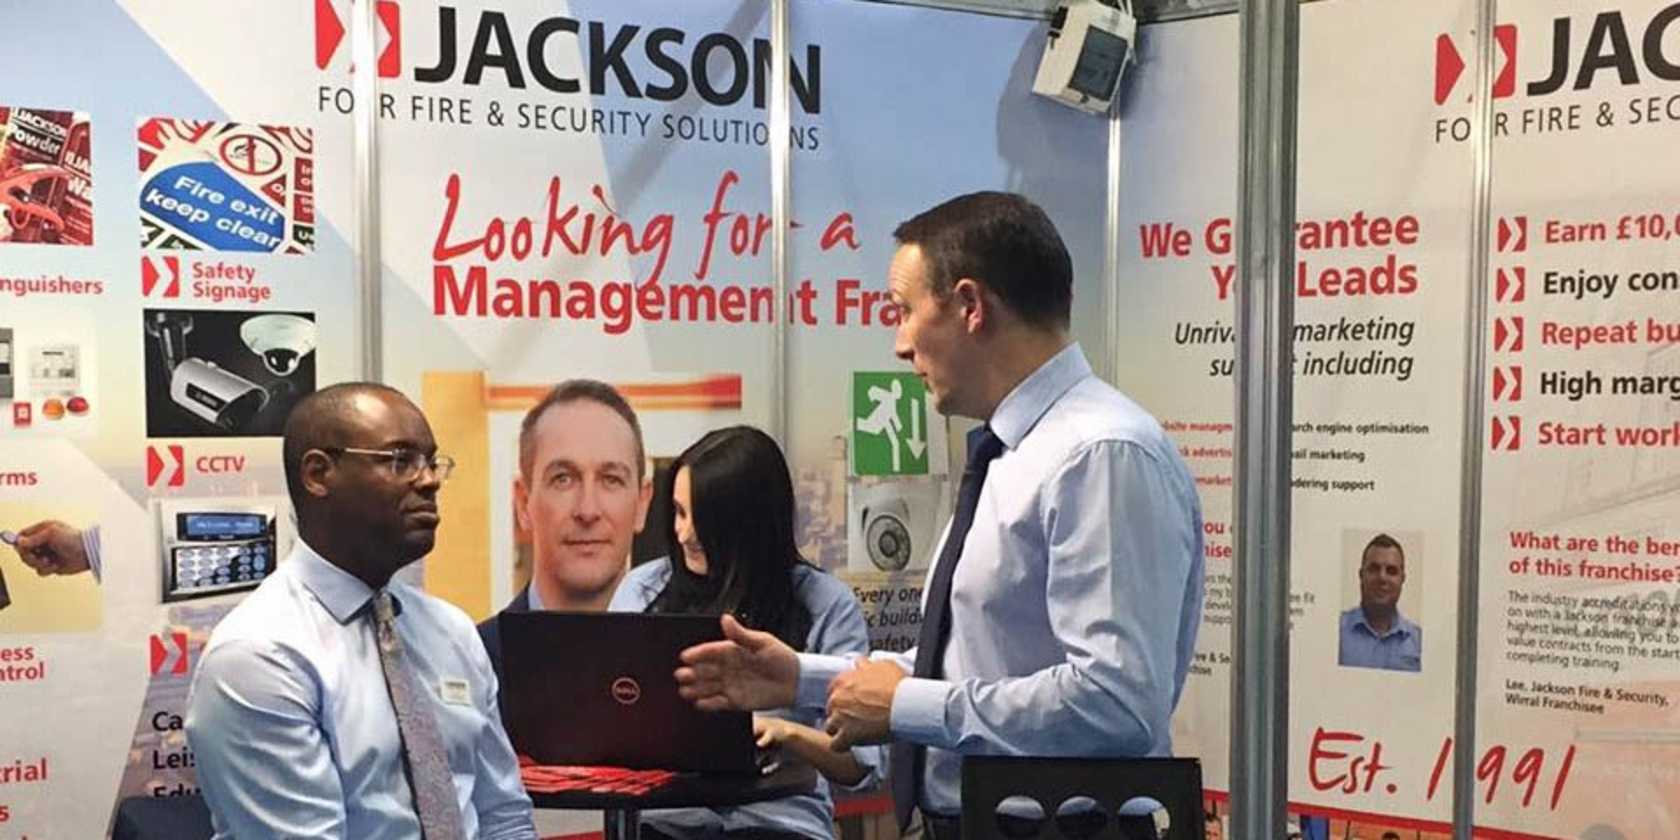 Exhibition Stand Design for Jackson Fire and Security Solutions